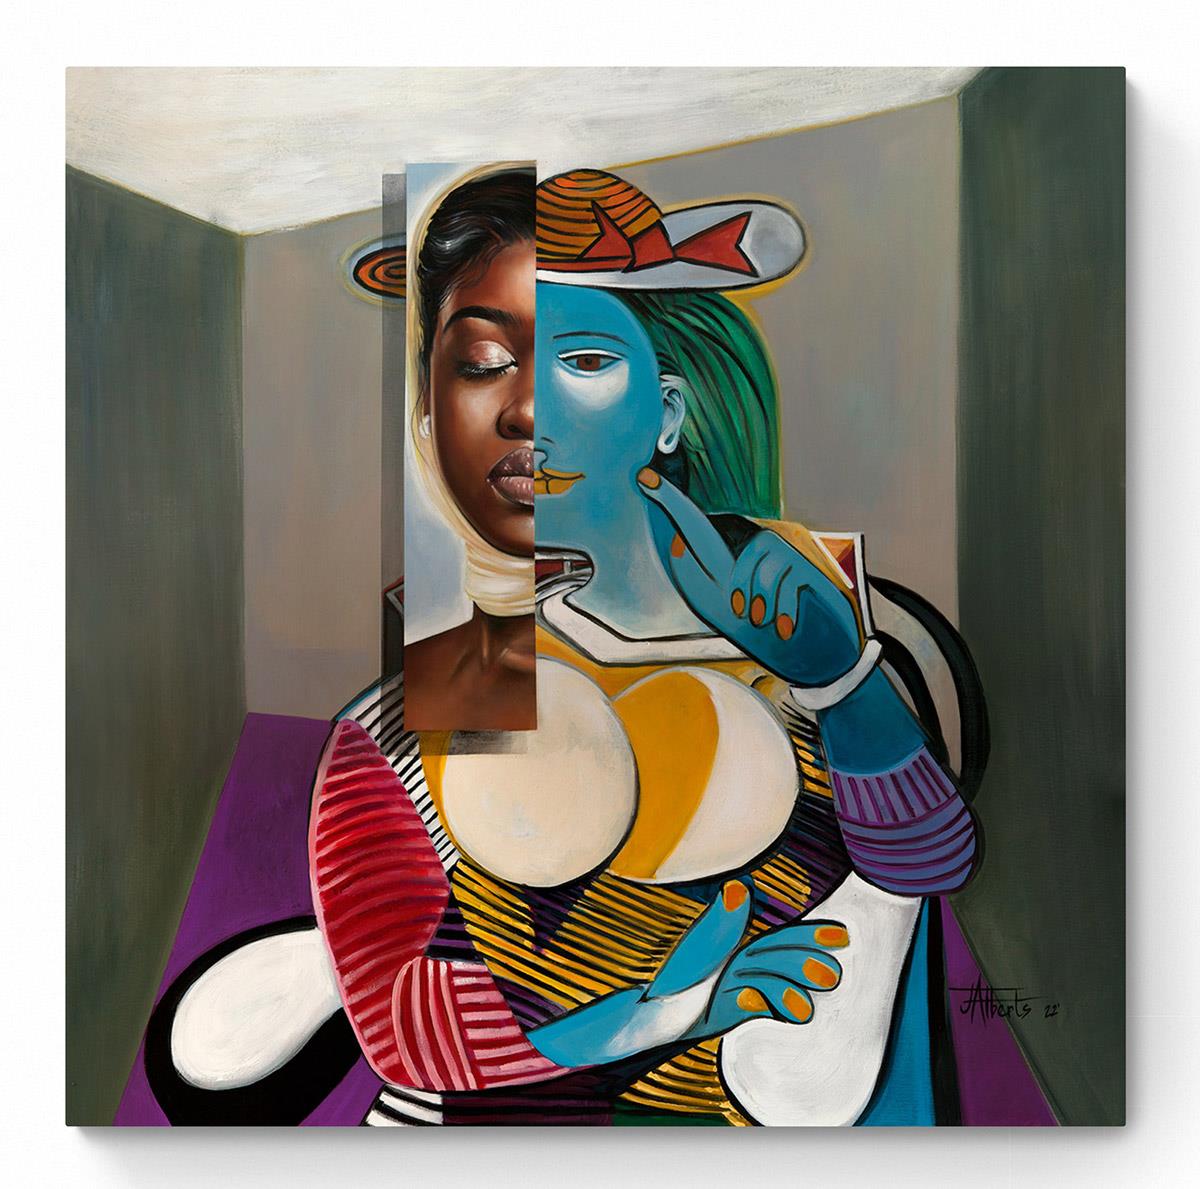 artwork based on a Picasso painting with a superimposed African woman